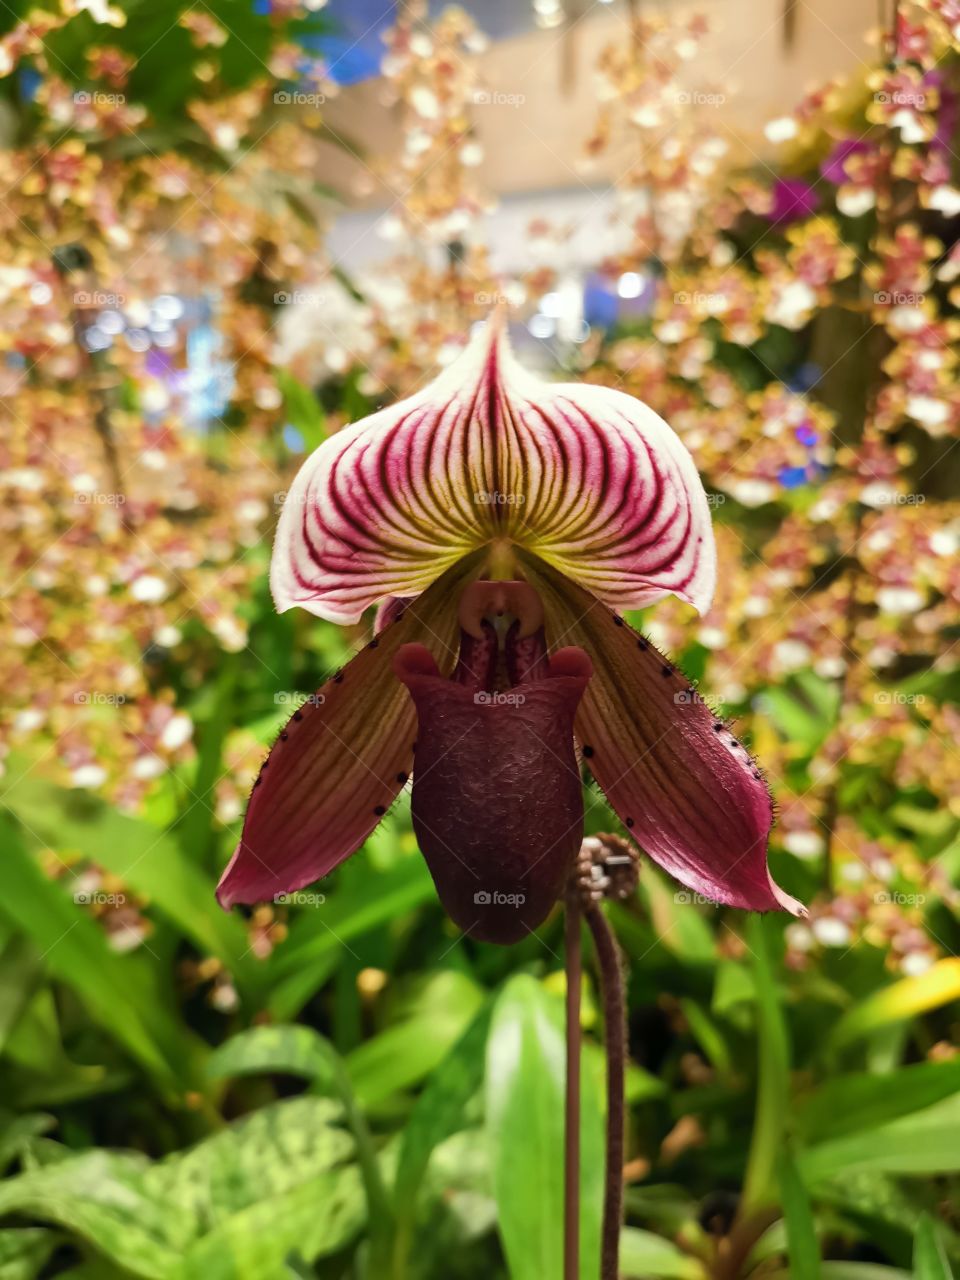 The orchid at Changi Airport Singapore.